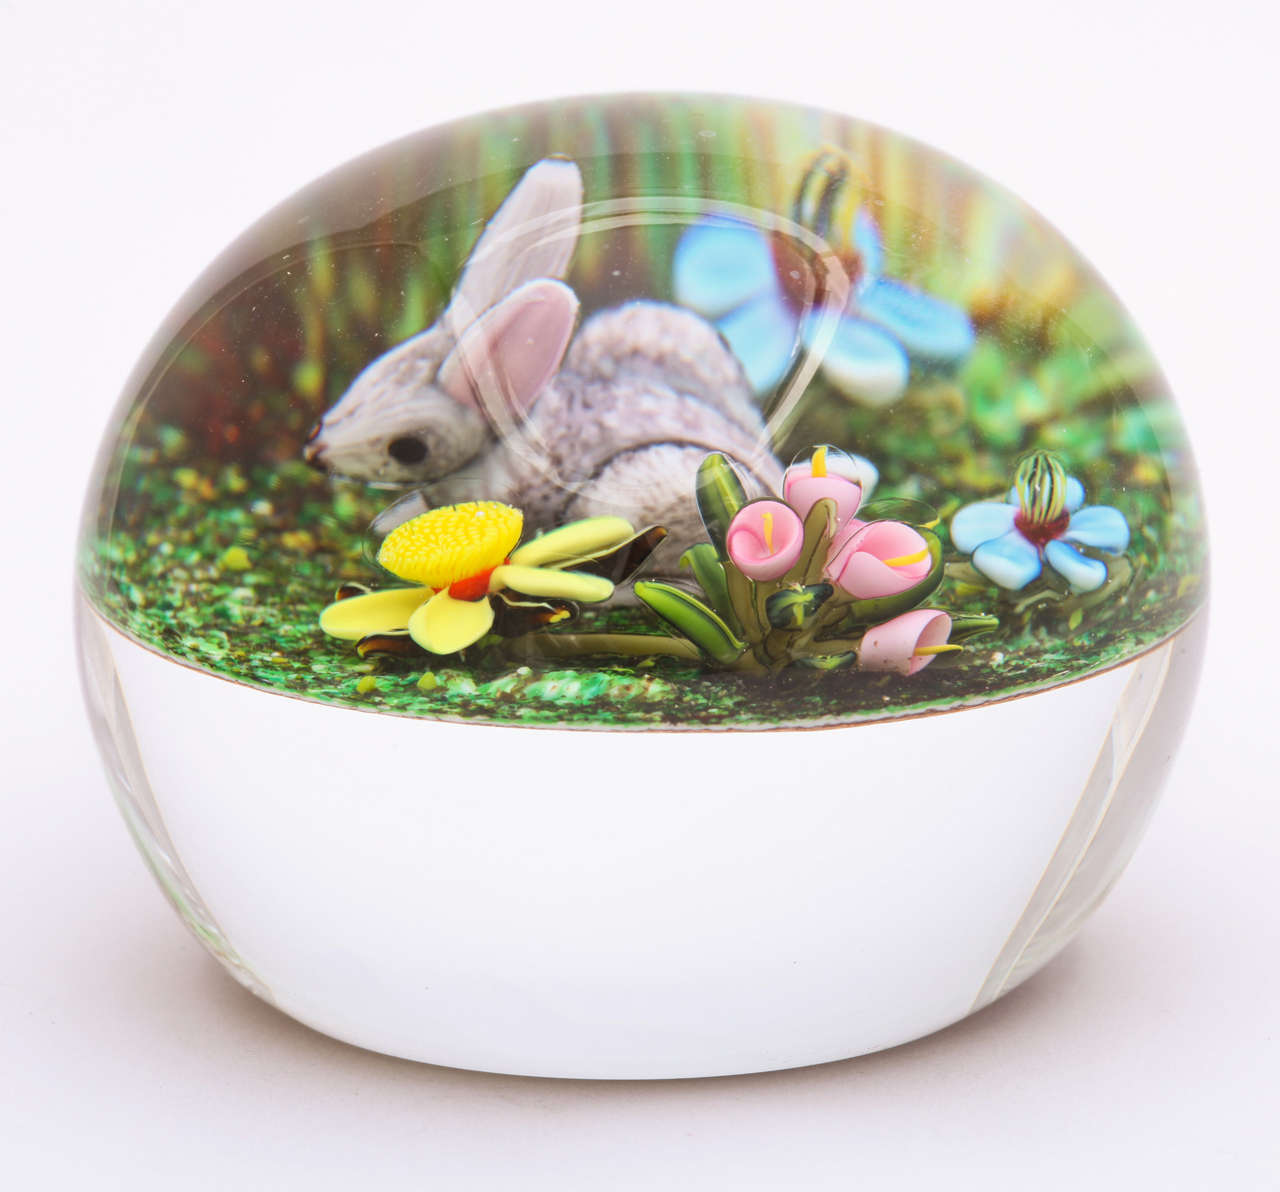 A beautiful Ken Rosenfeld miniature paperweight with a rabbit and flowers on a mossy ground